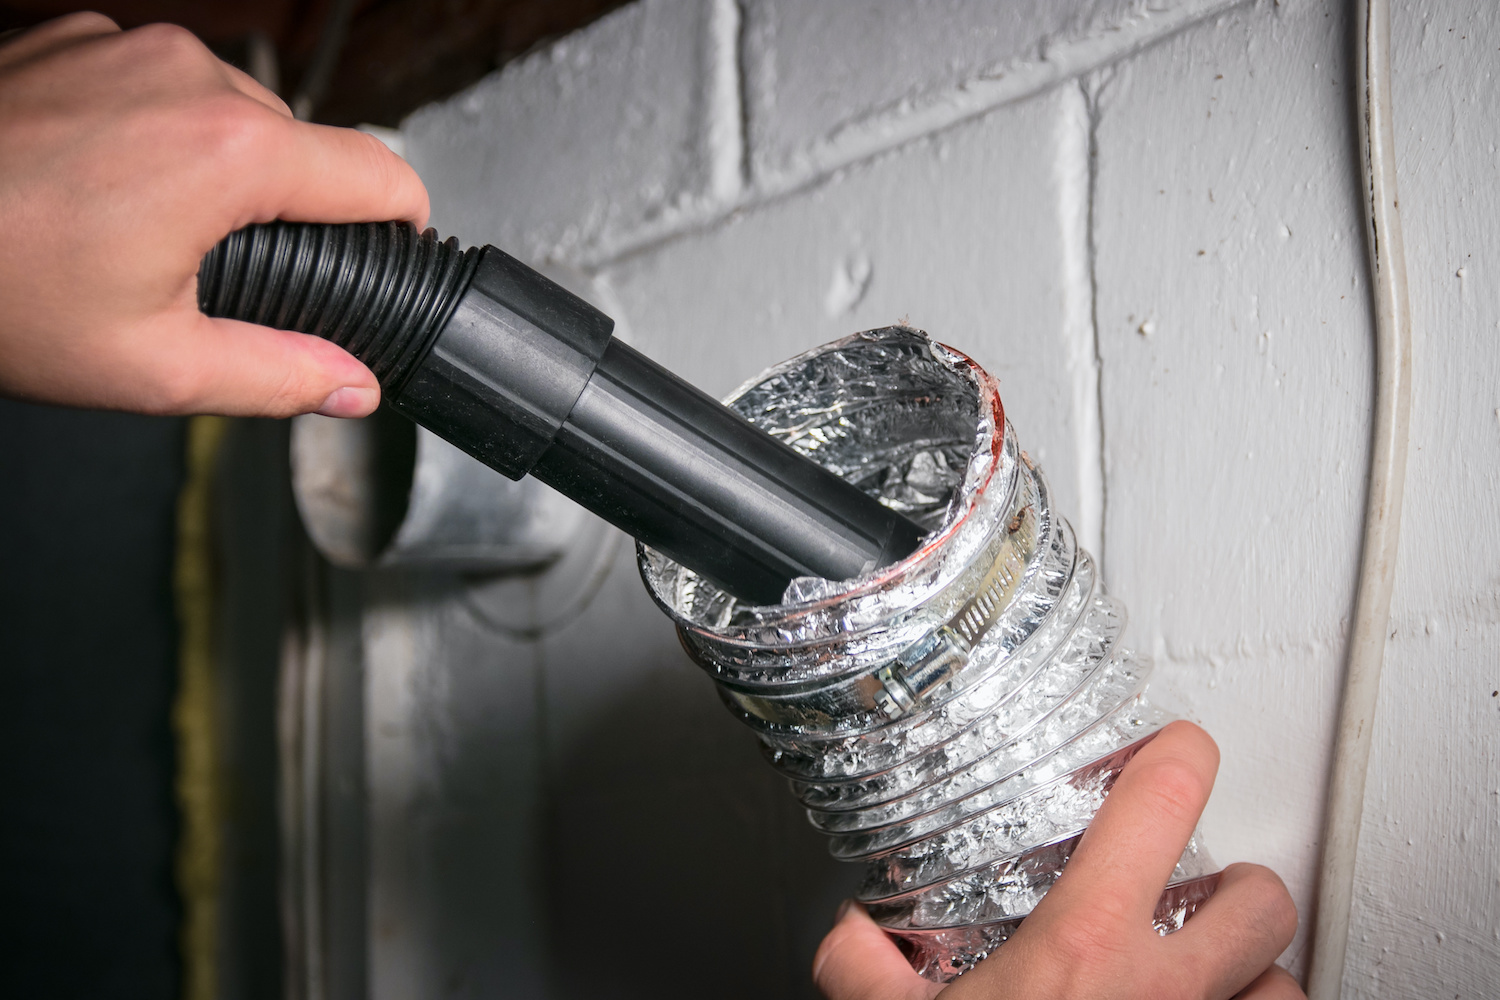 Dryer Vent Cleaning Hose